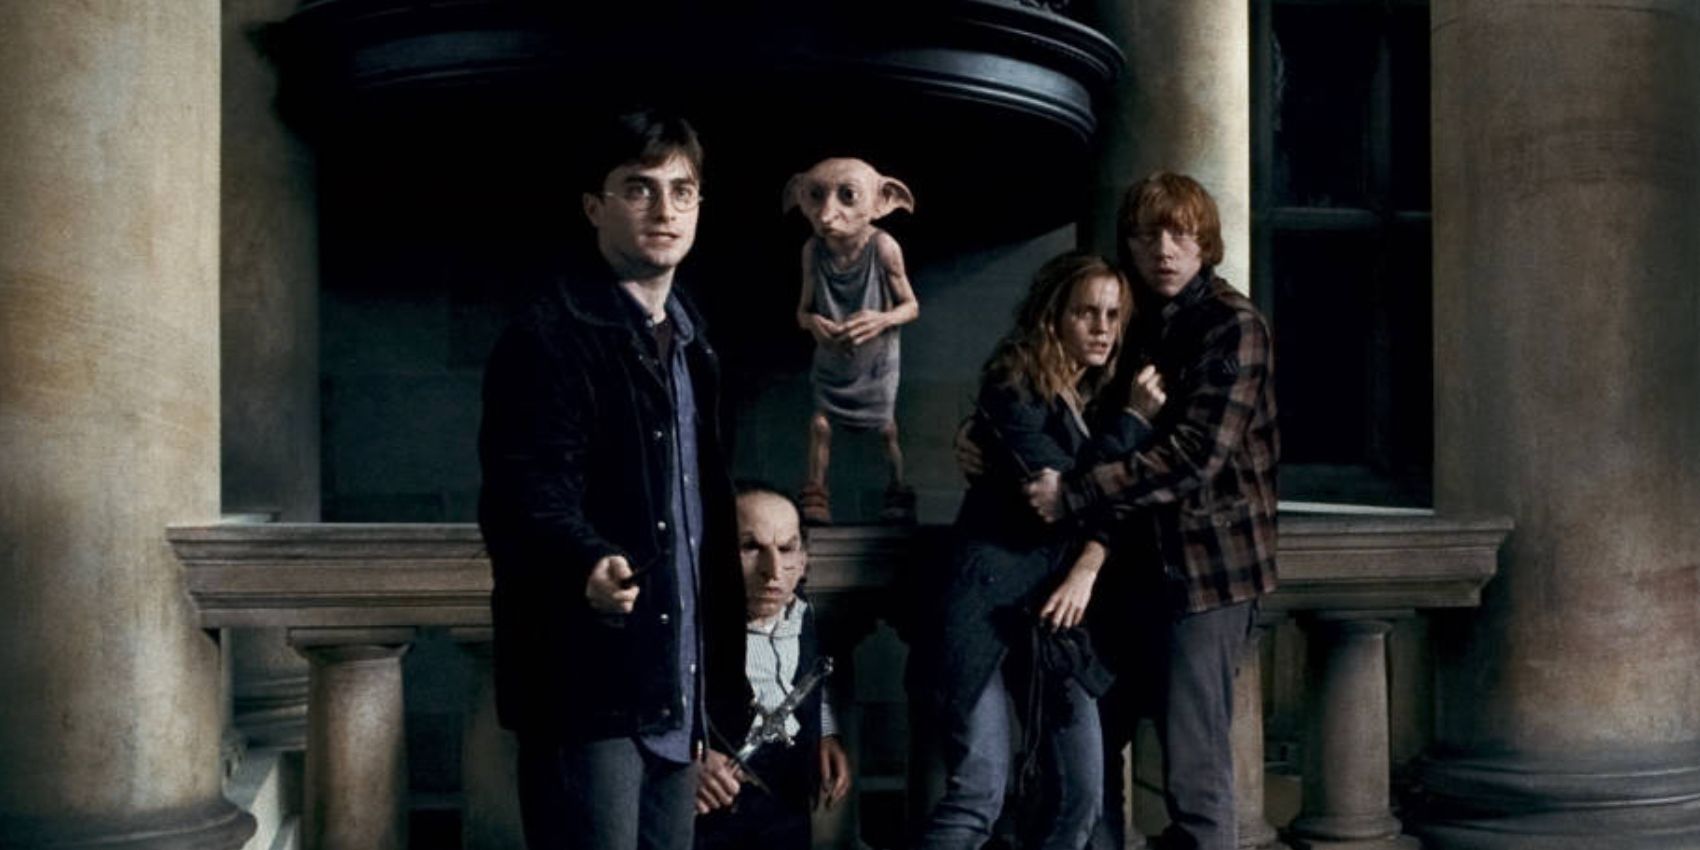 Dobby with Harry Potter and his allies in Deathly Hallows